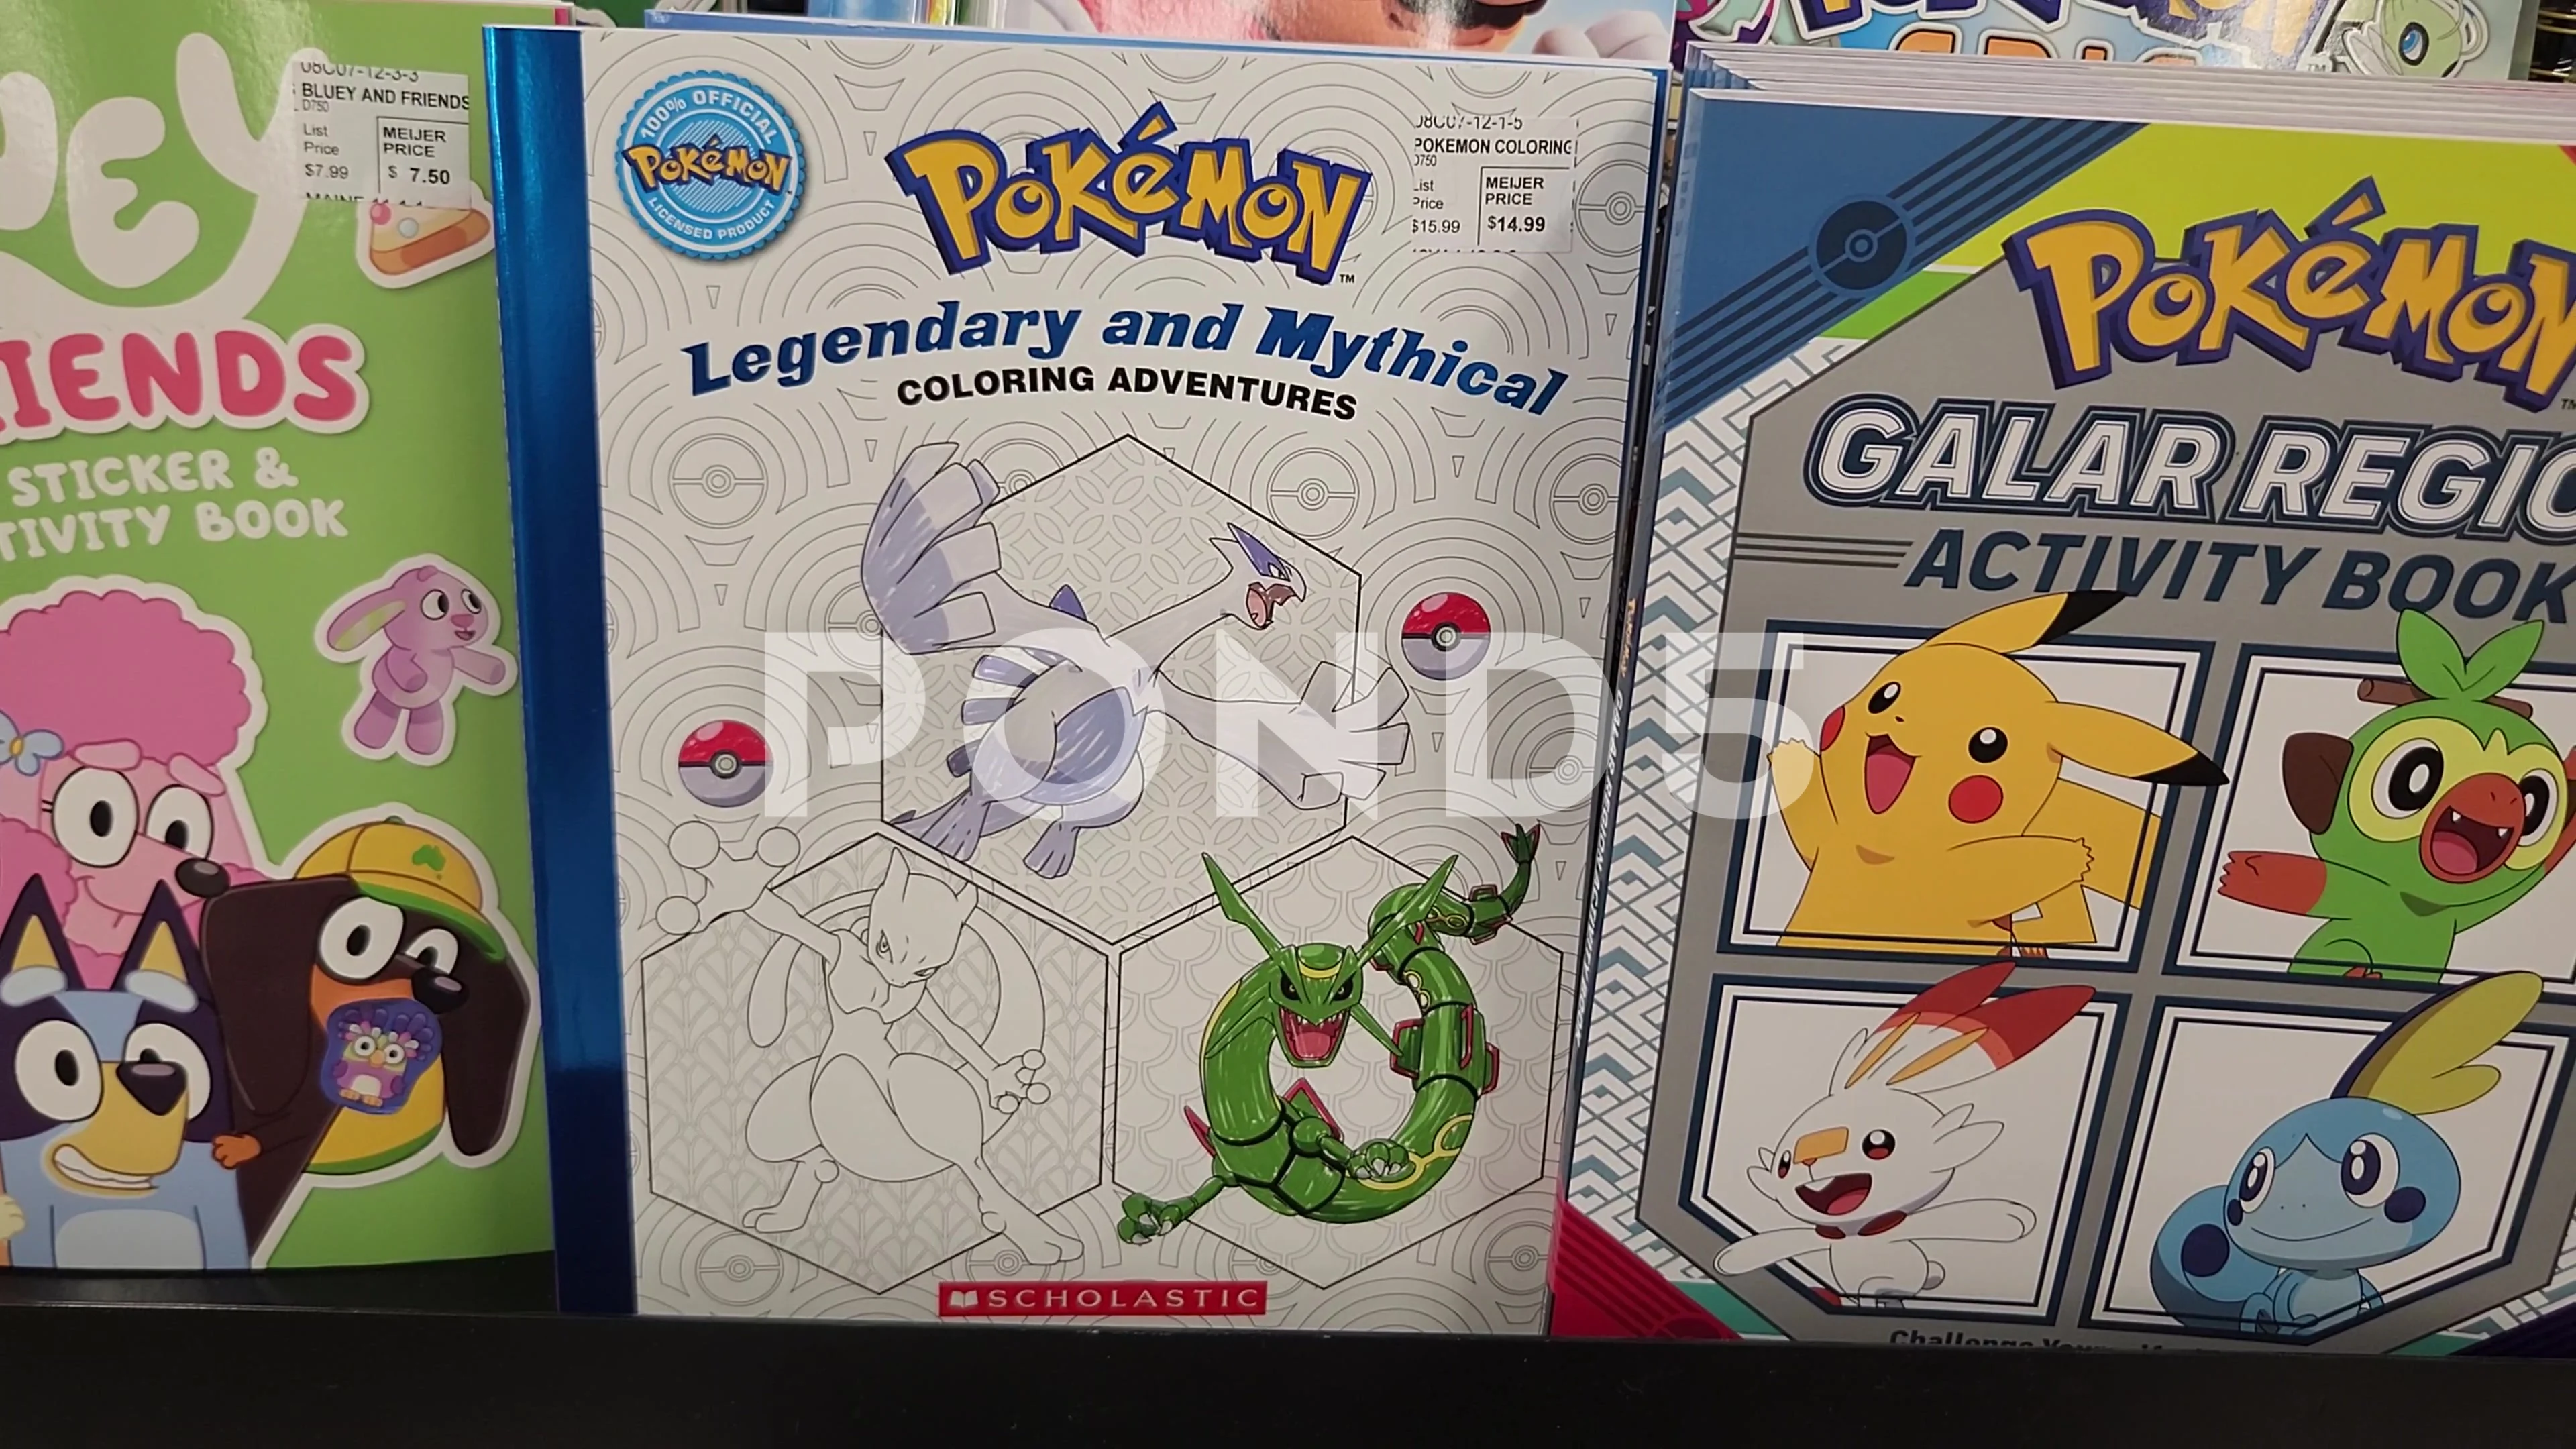 Pokemon: Coloring Adventures Legendary & Mythical Pokemon by